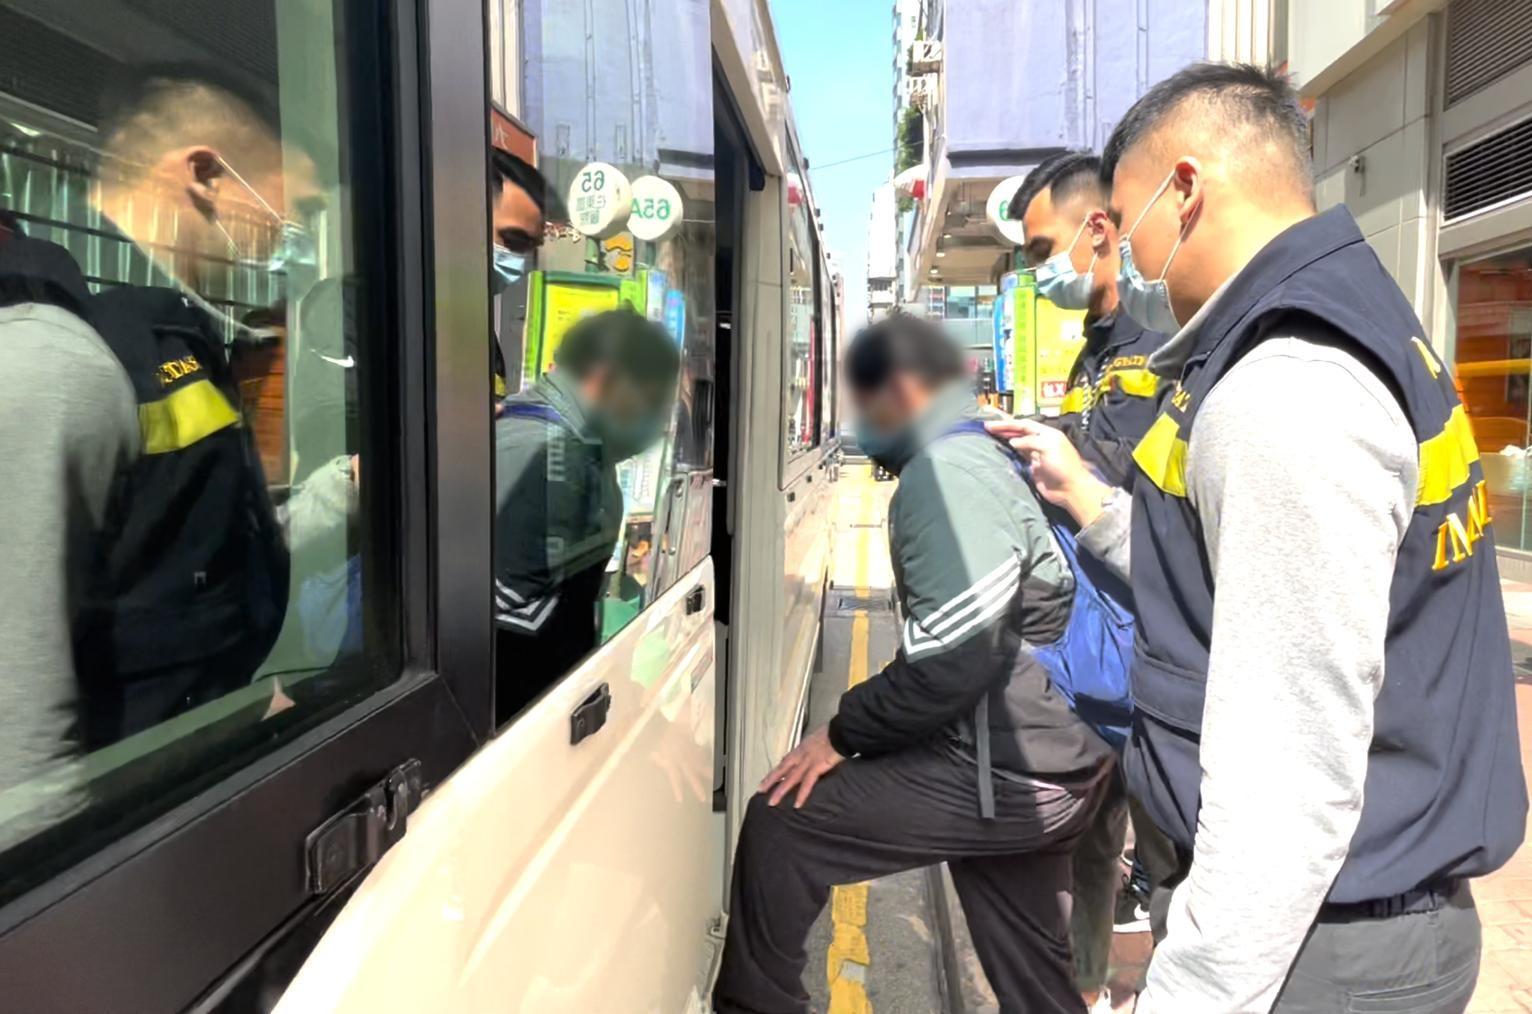 The Immigration Department mounted a series of territory-wide anti-illegal worker operations codenamed "Twilight" on January 24 and 25, and yesterday (January 27). Photo shows a suspected illegal worker arrested during the operations.